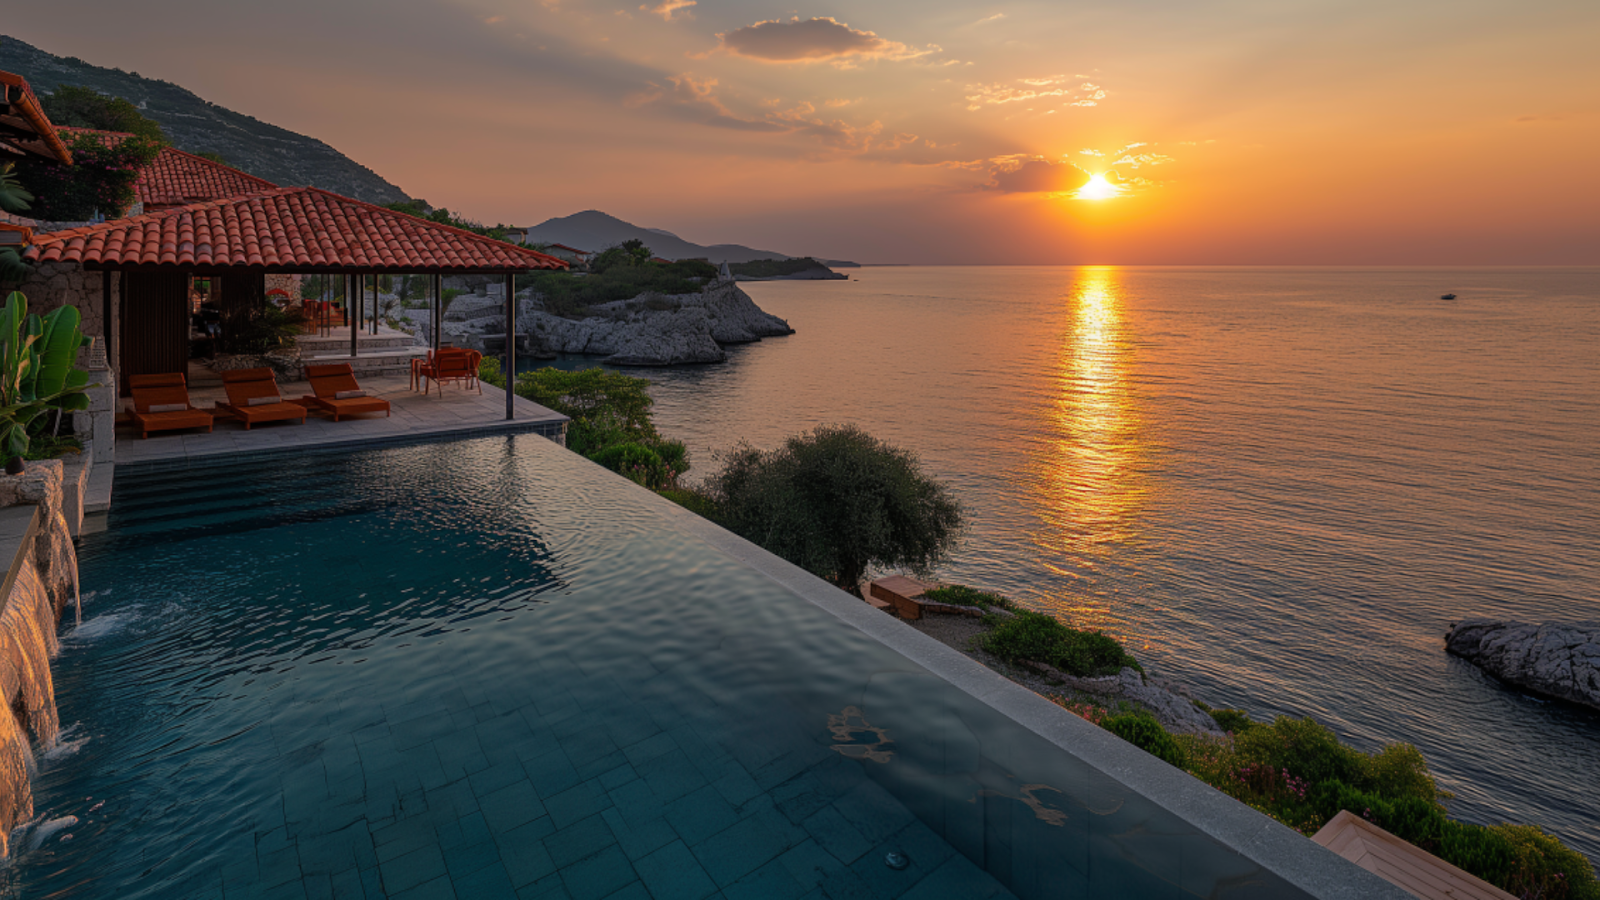 Sunset view from a luxurious villa on Vis, overlooking the tranquil Adriatic Sea.